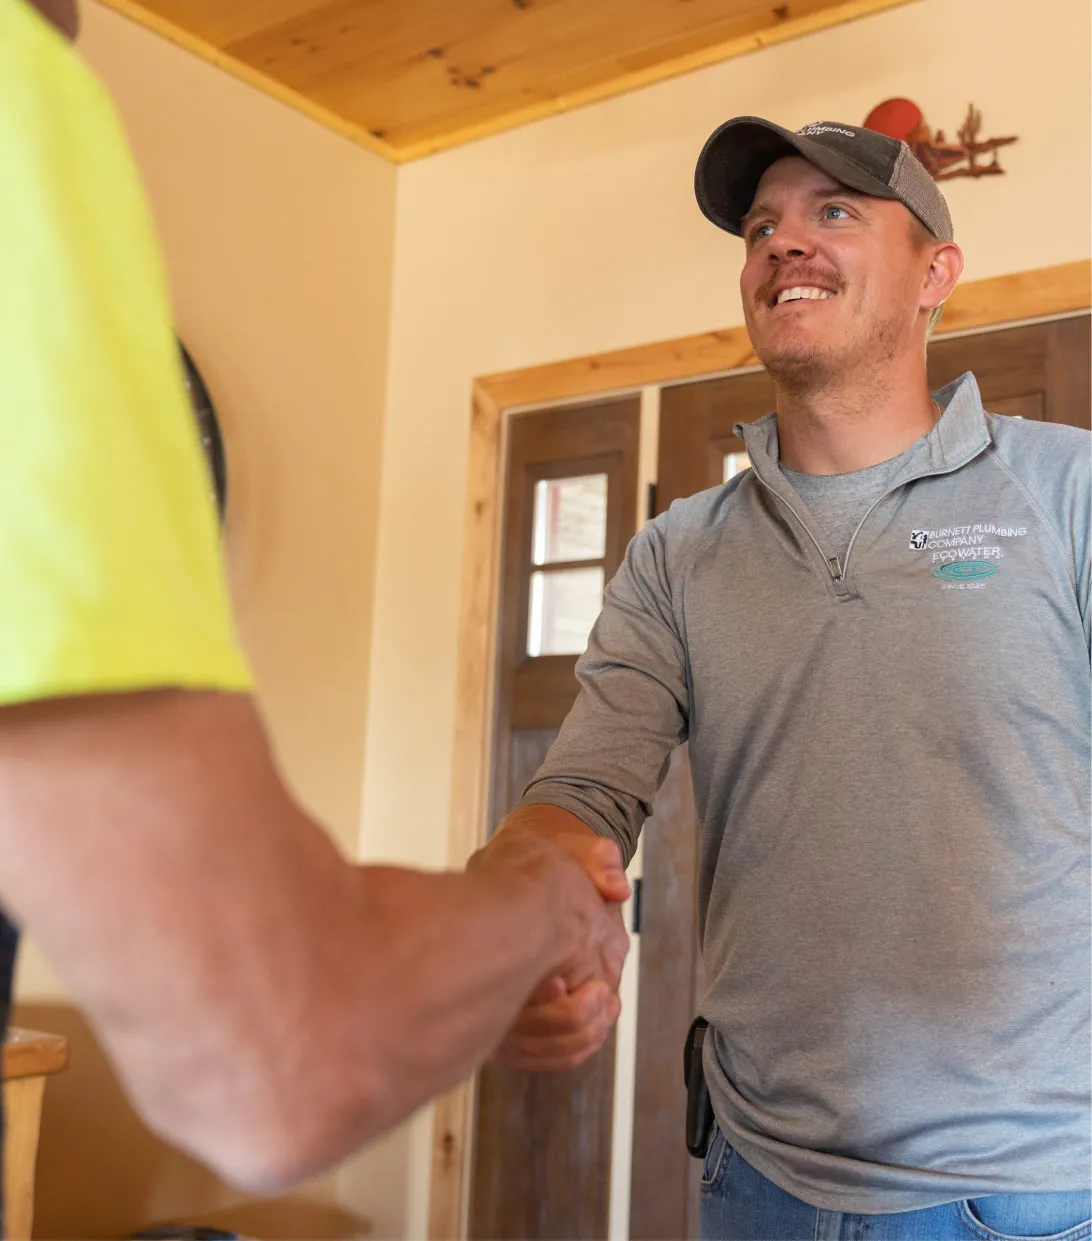 A smiling Luke Thoreson, owner of Burnett Plumbing Company shaking hands with a customer. 